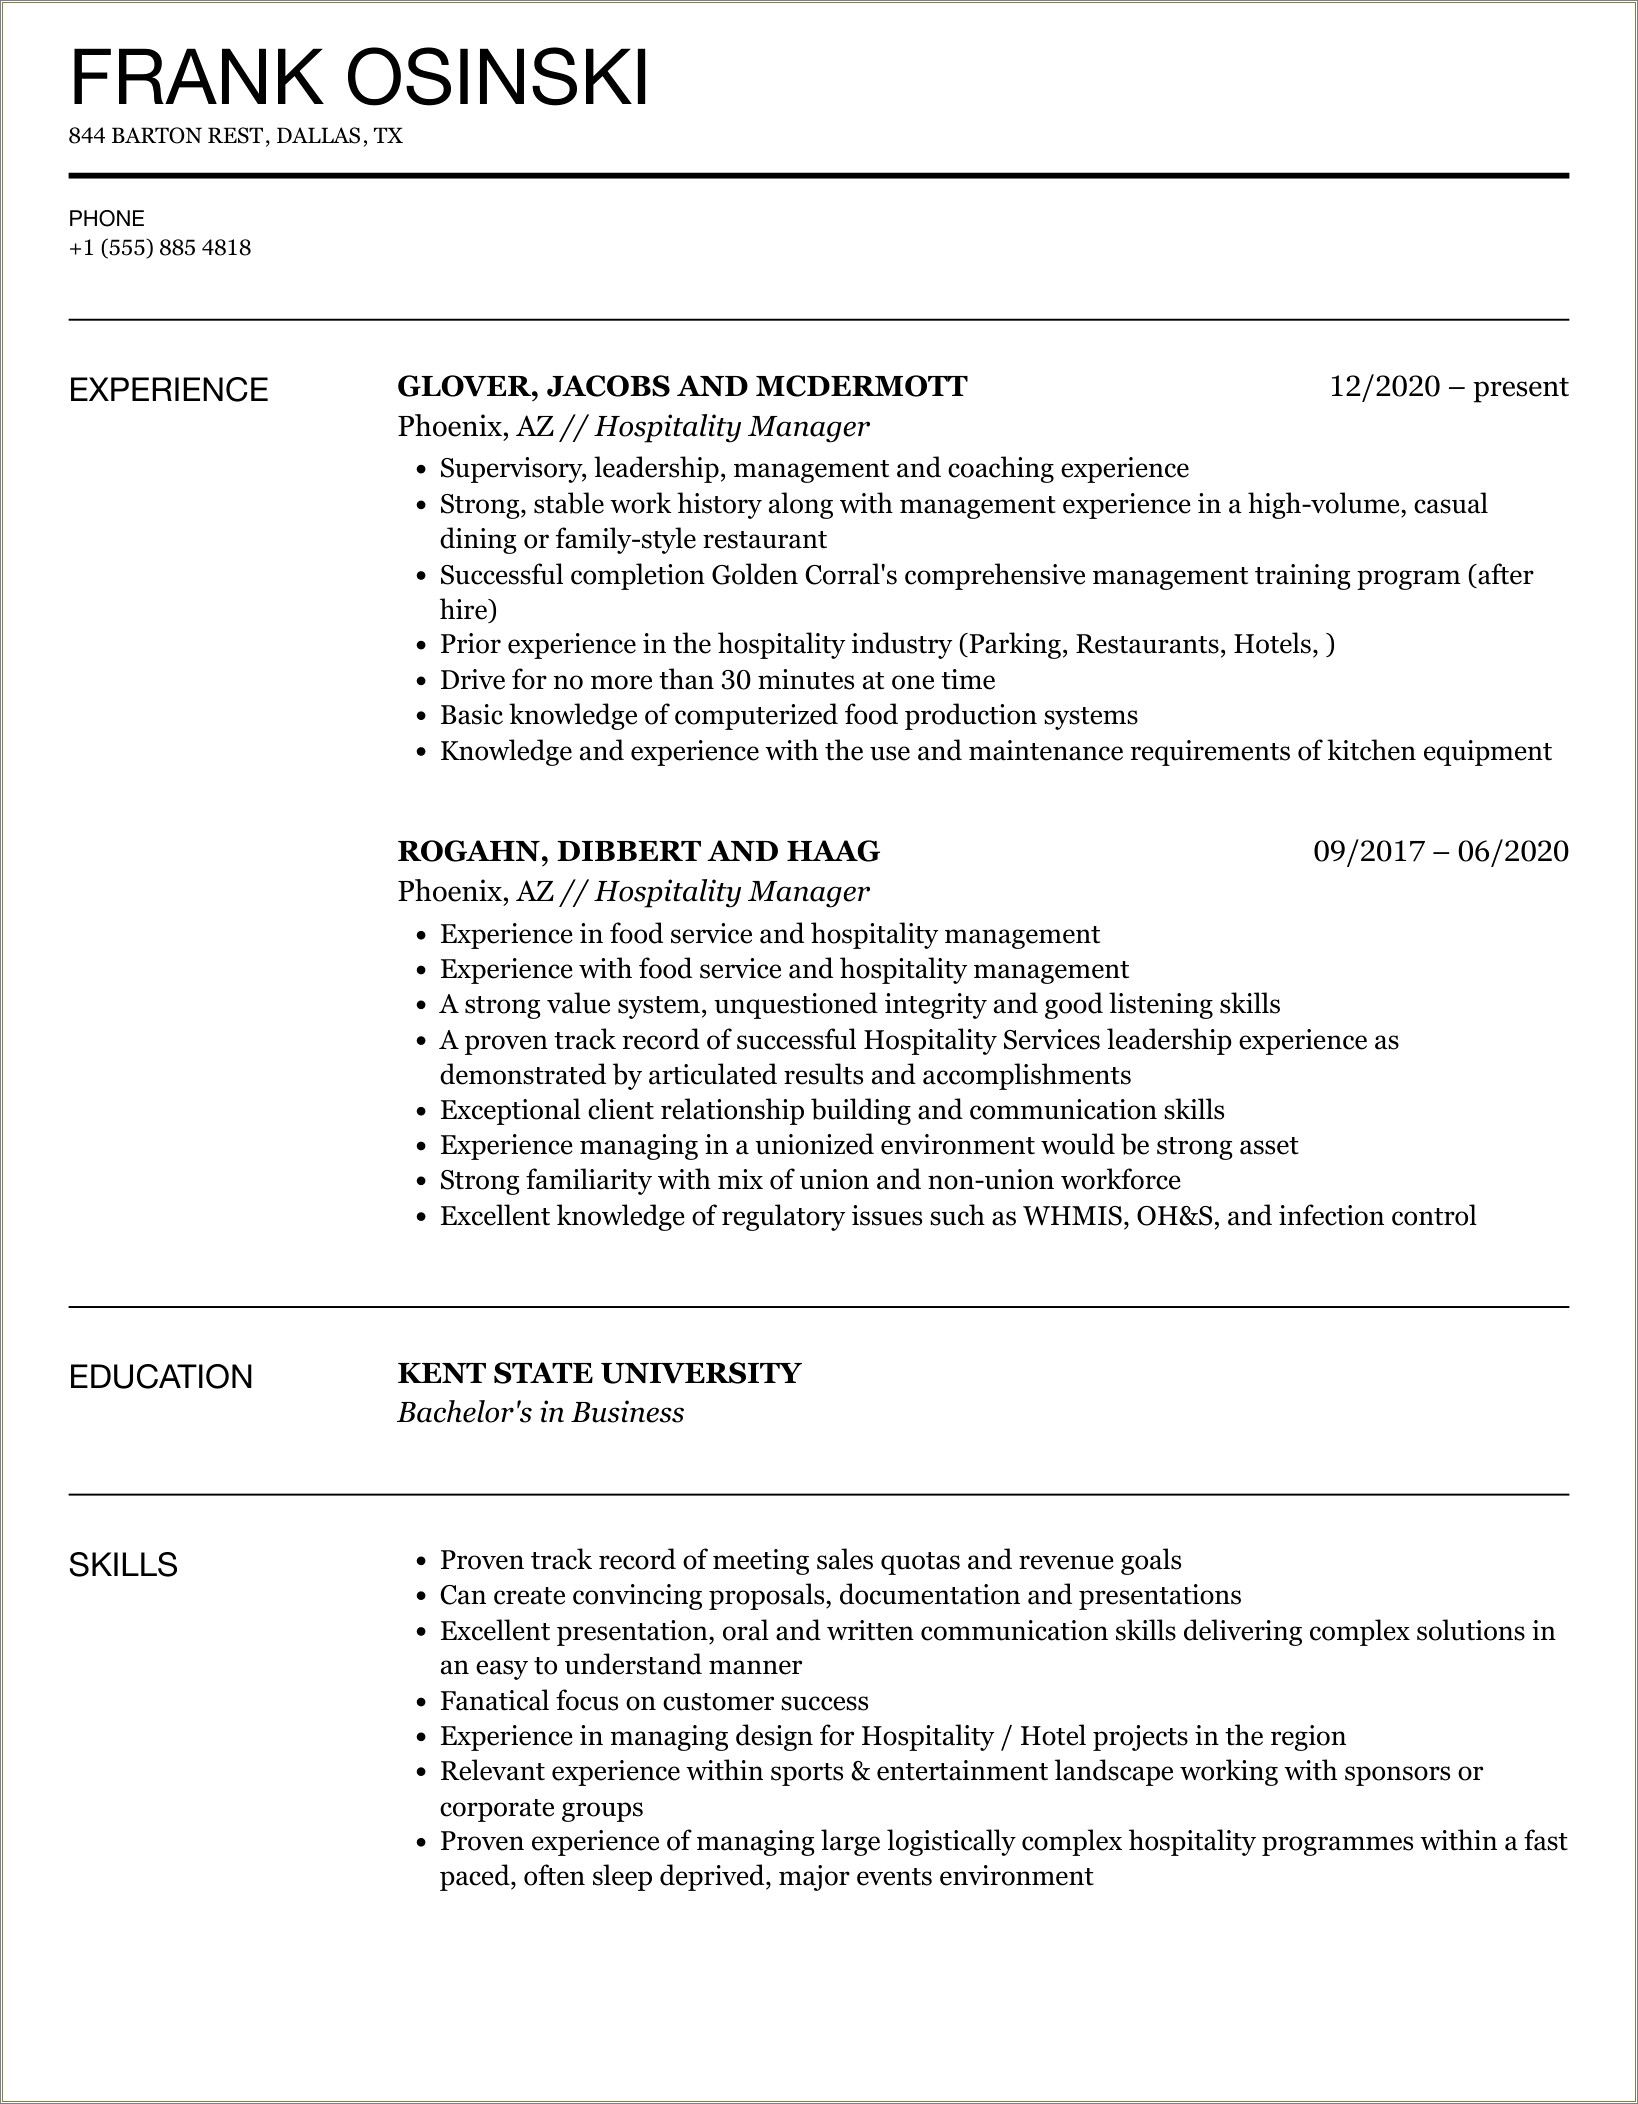 Resume Objective For Hotel And Restaurant Management